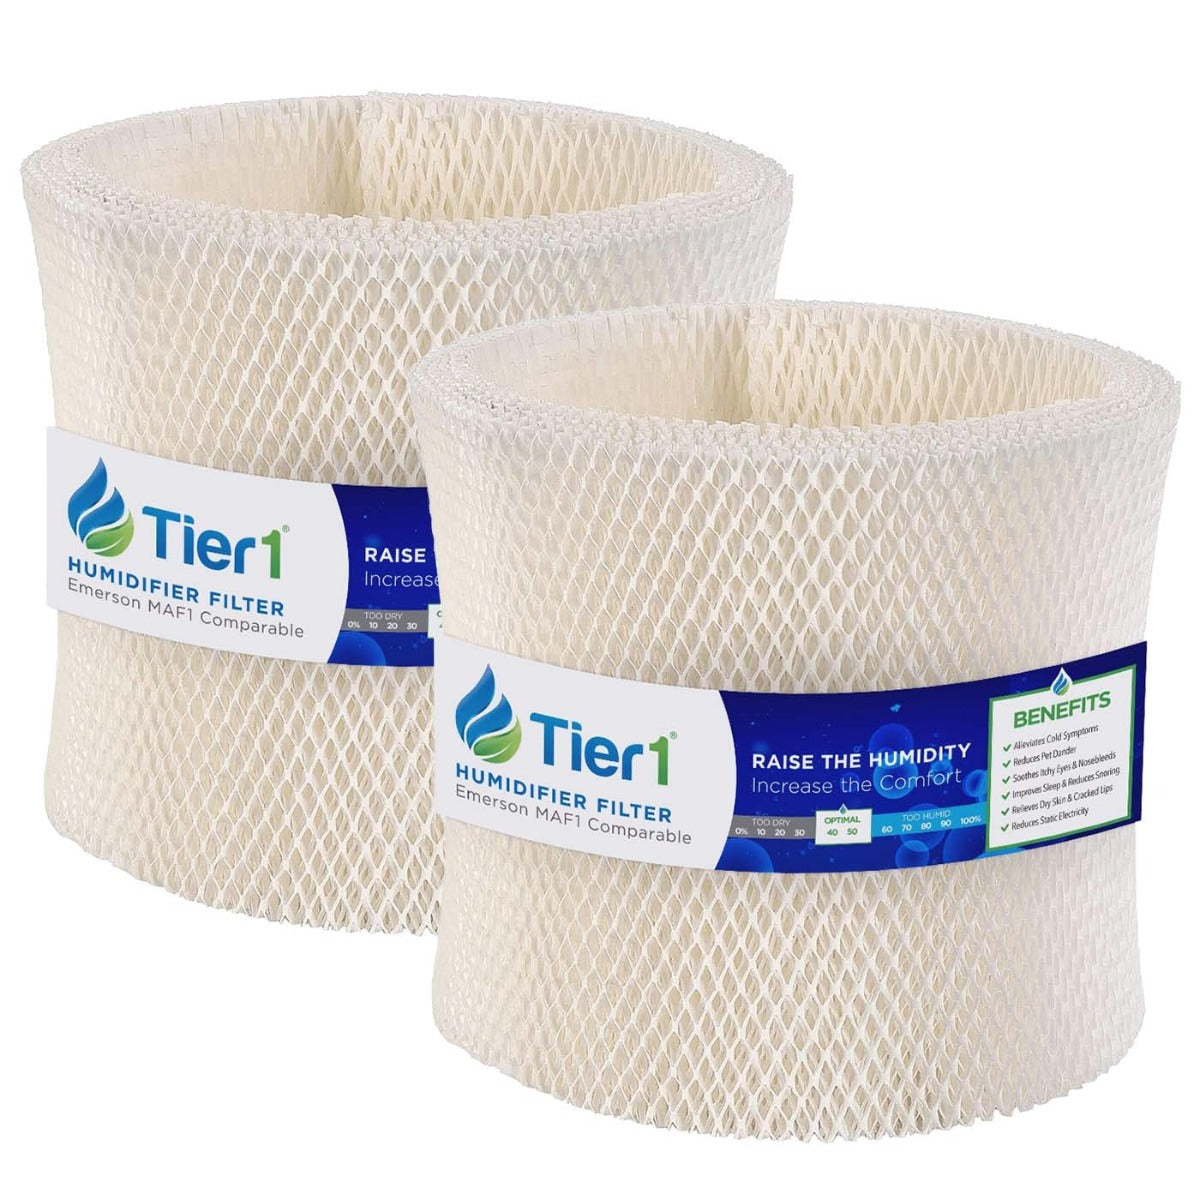 Emerson MAF1 Comparable Humidifier Filter by Tier1